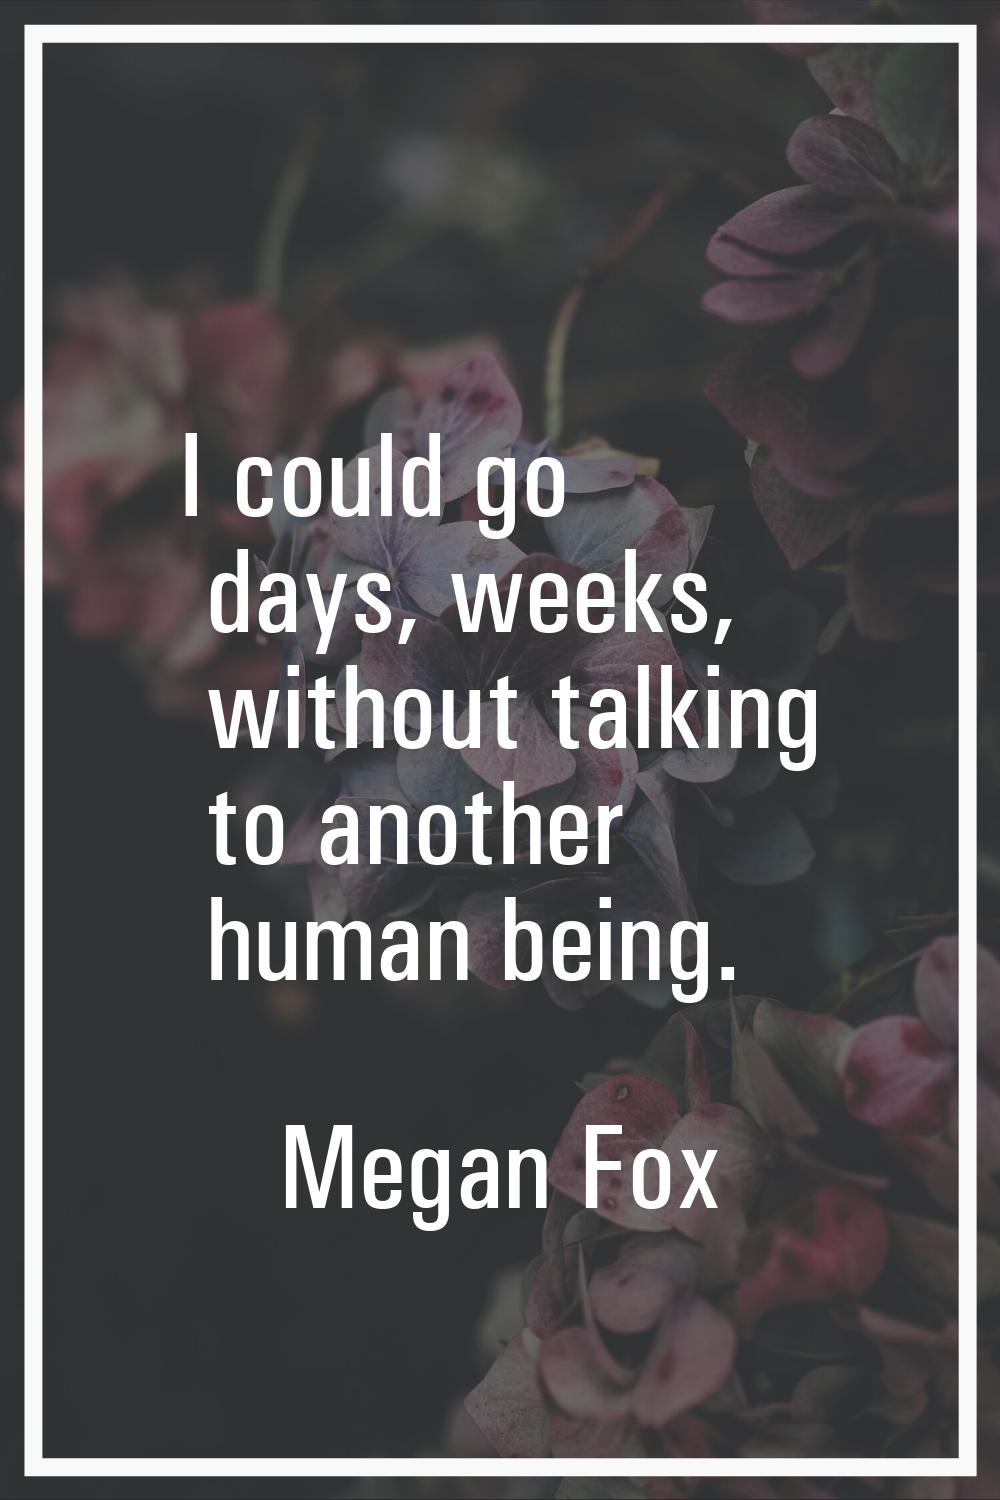 I could go days, weeks, without talking to another human being.